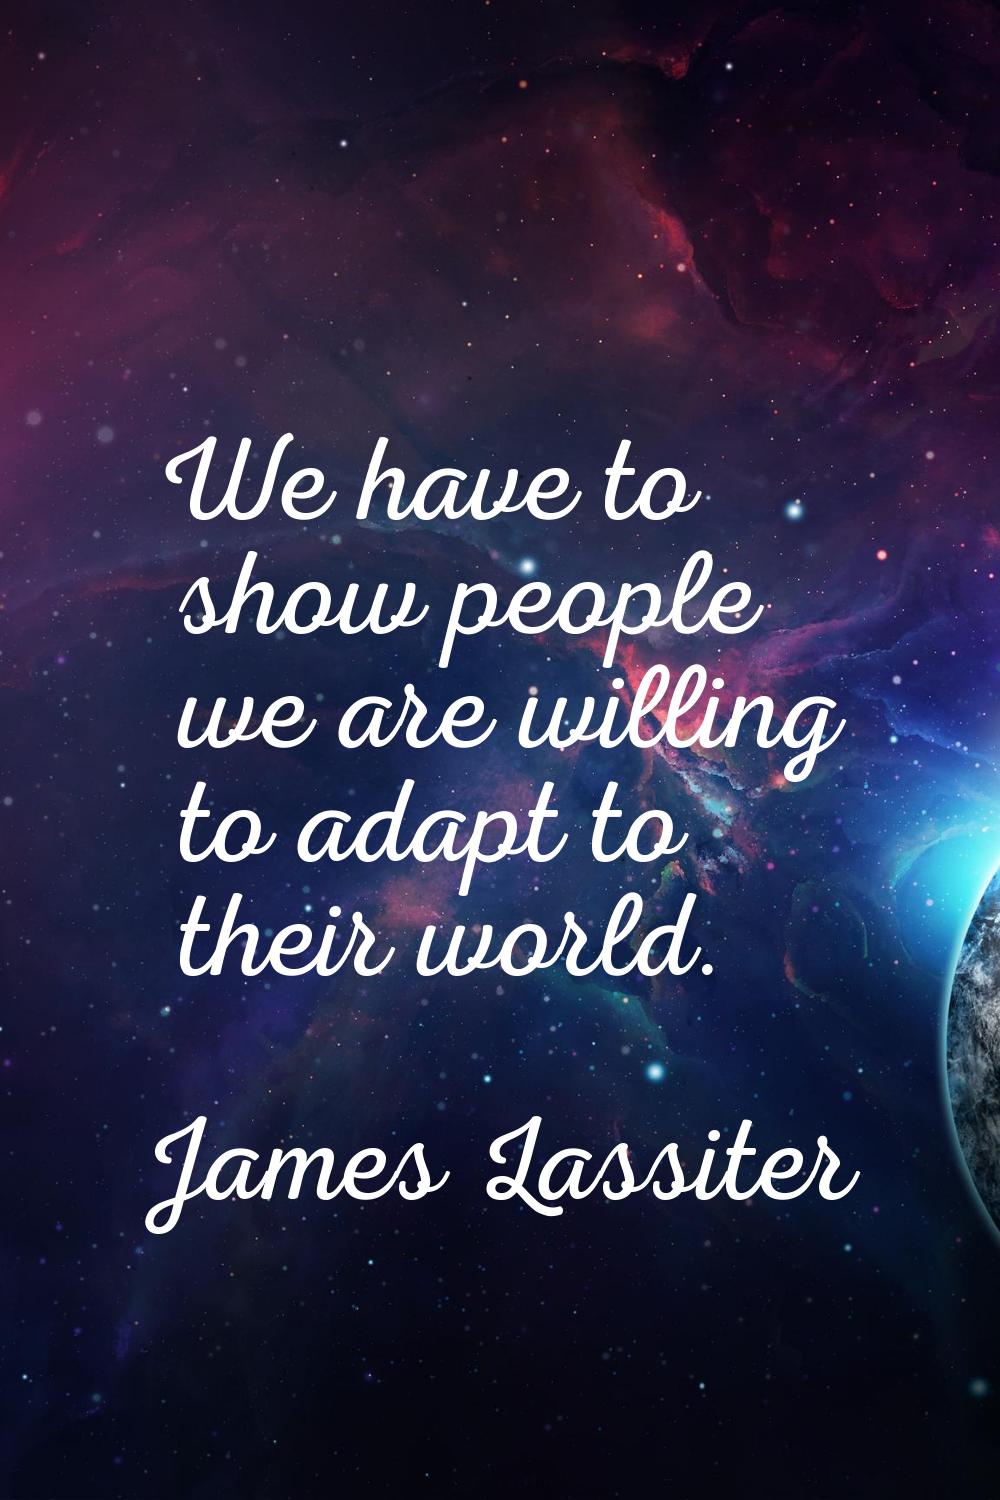 We have to show people we are willing to adapt to their world.